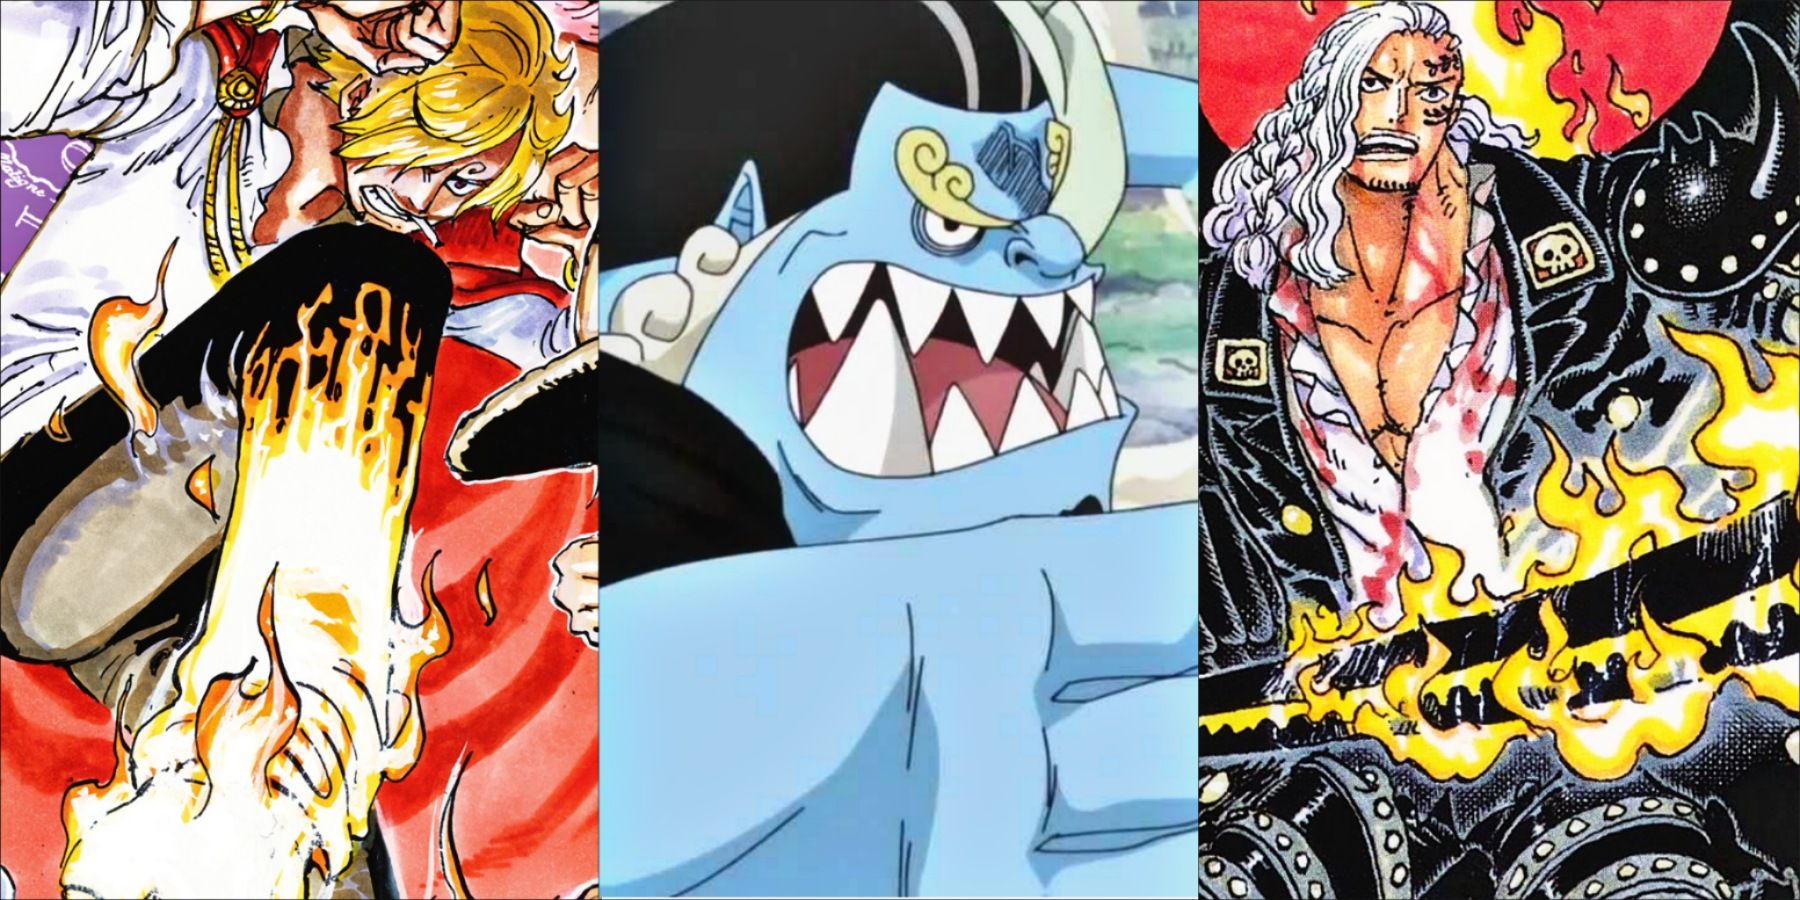 Haki Vs Devil Fruits: Which ability is more helpful in obtaining